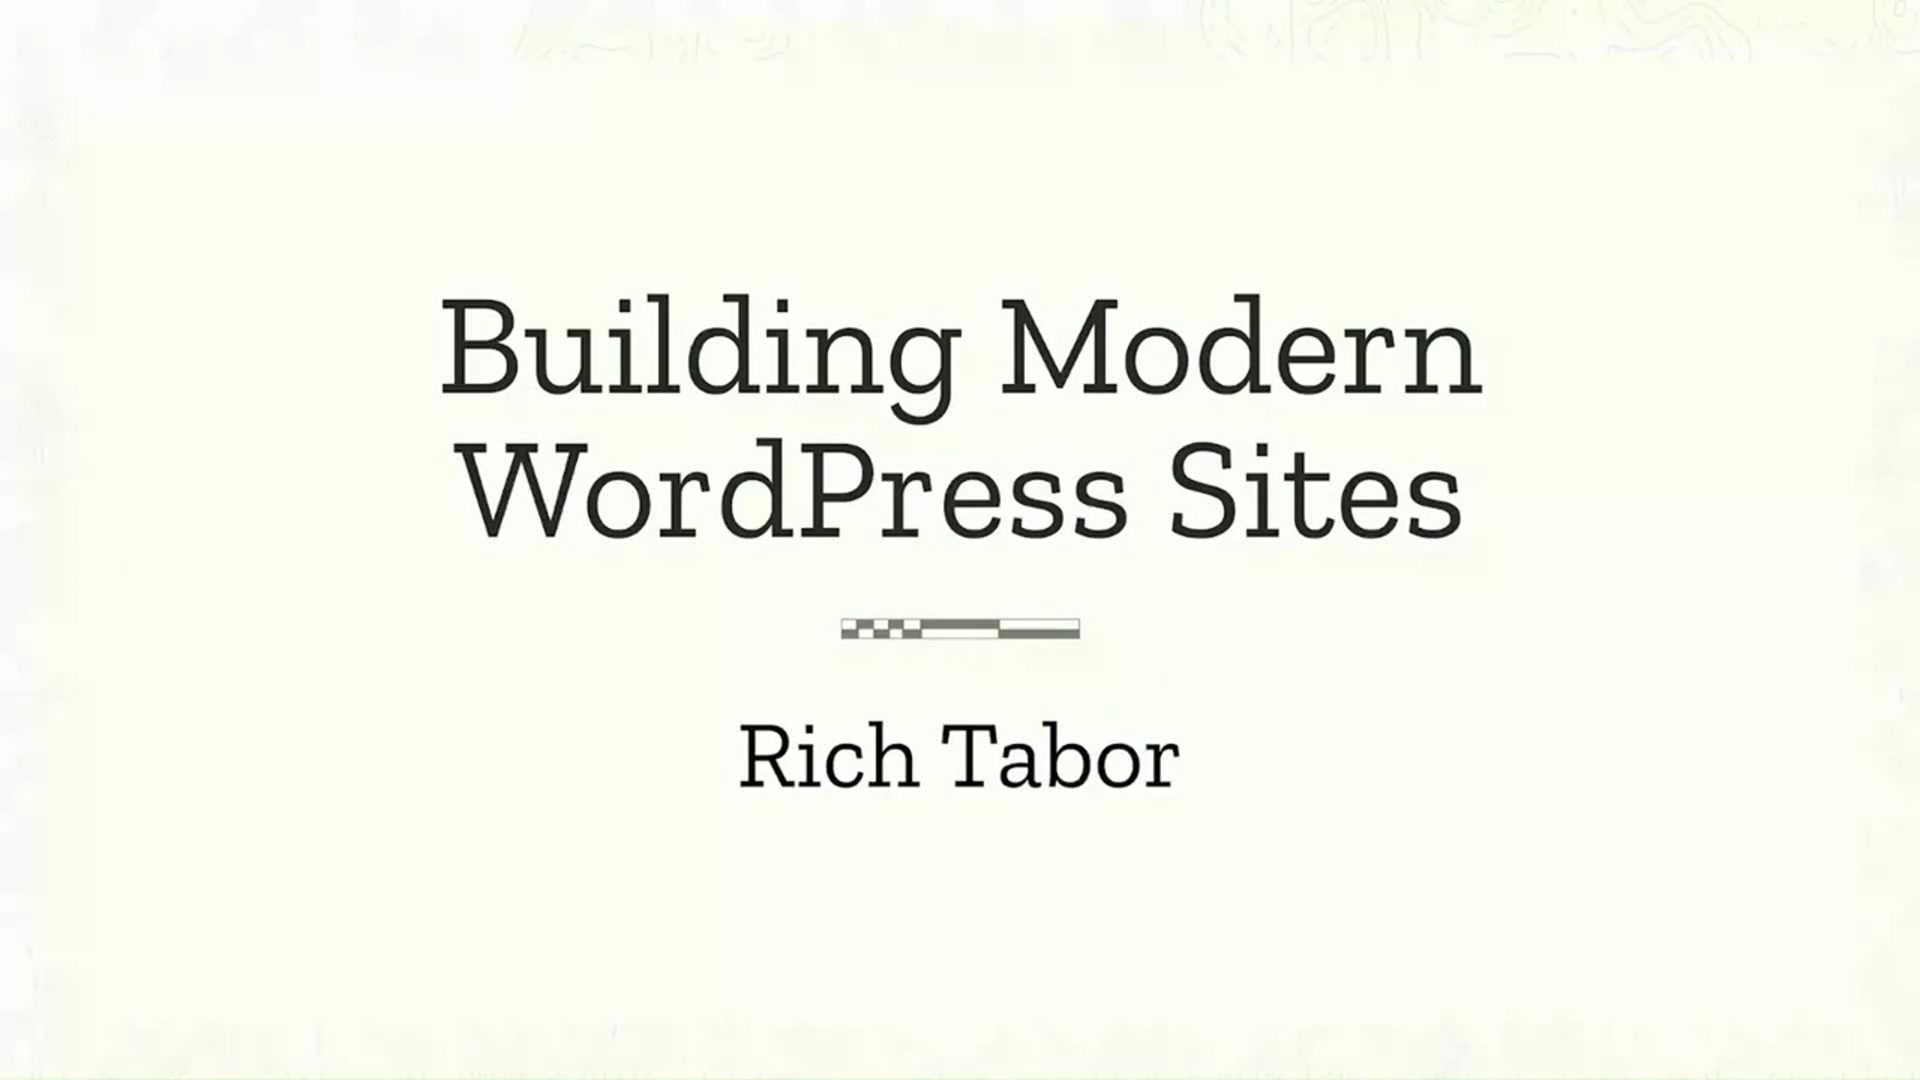 Rich Tabor: Building modern WordPress sites: the interplay of blocks, patterns and theme.json